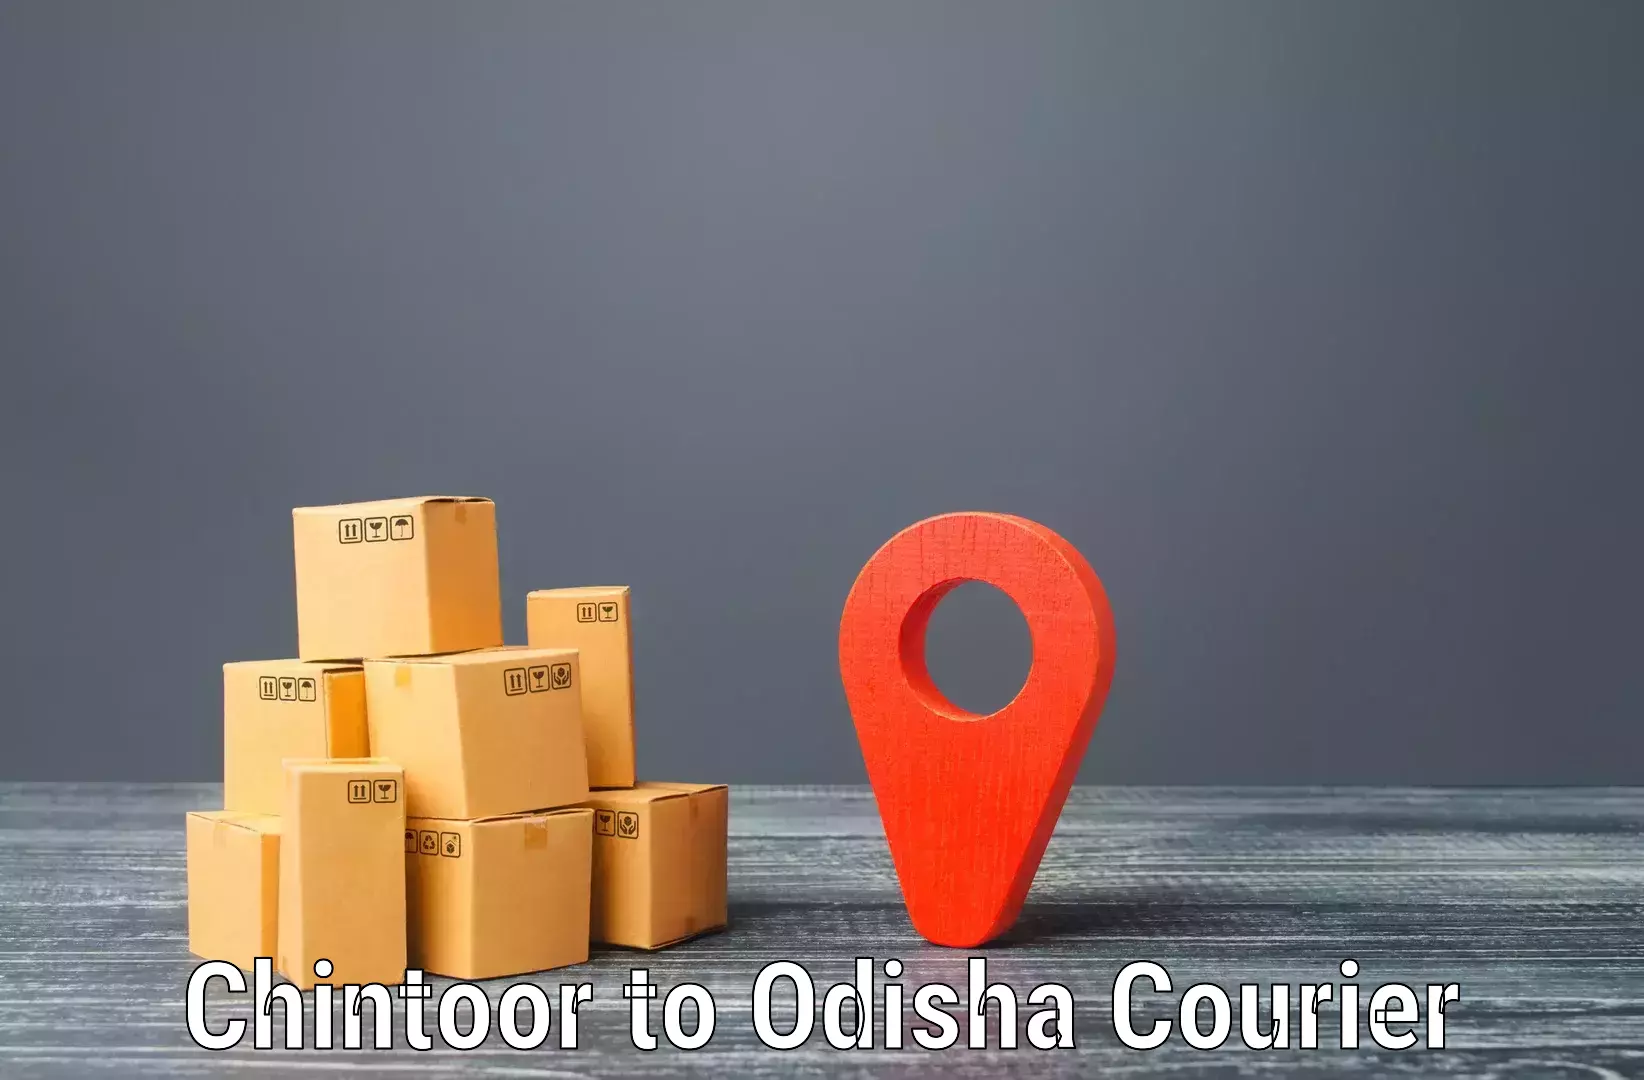 Modern courier technology Chintoor to Barbil